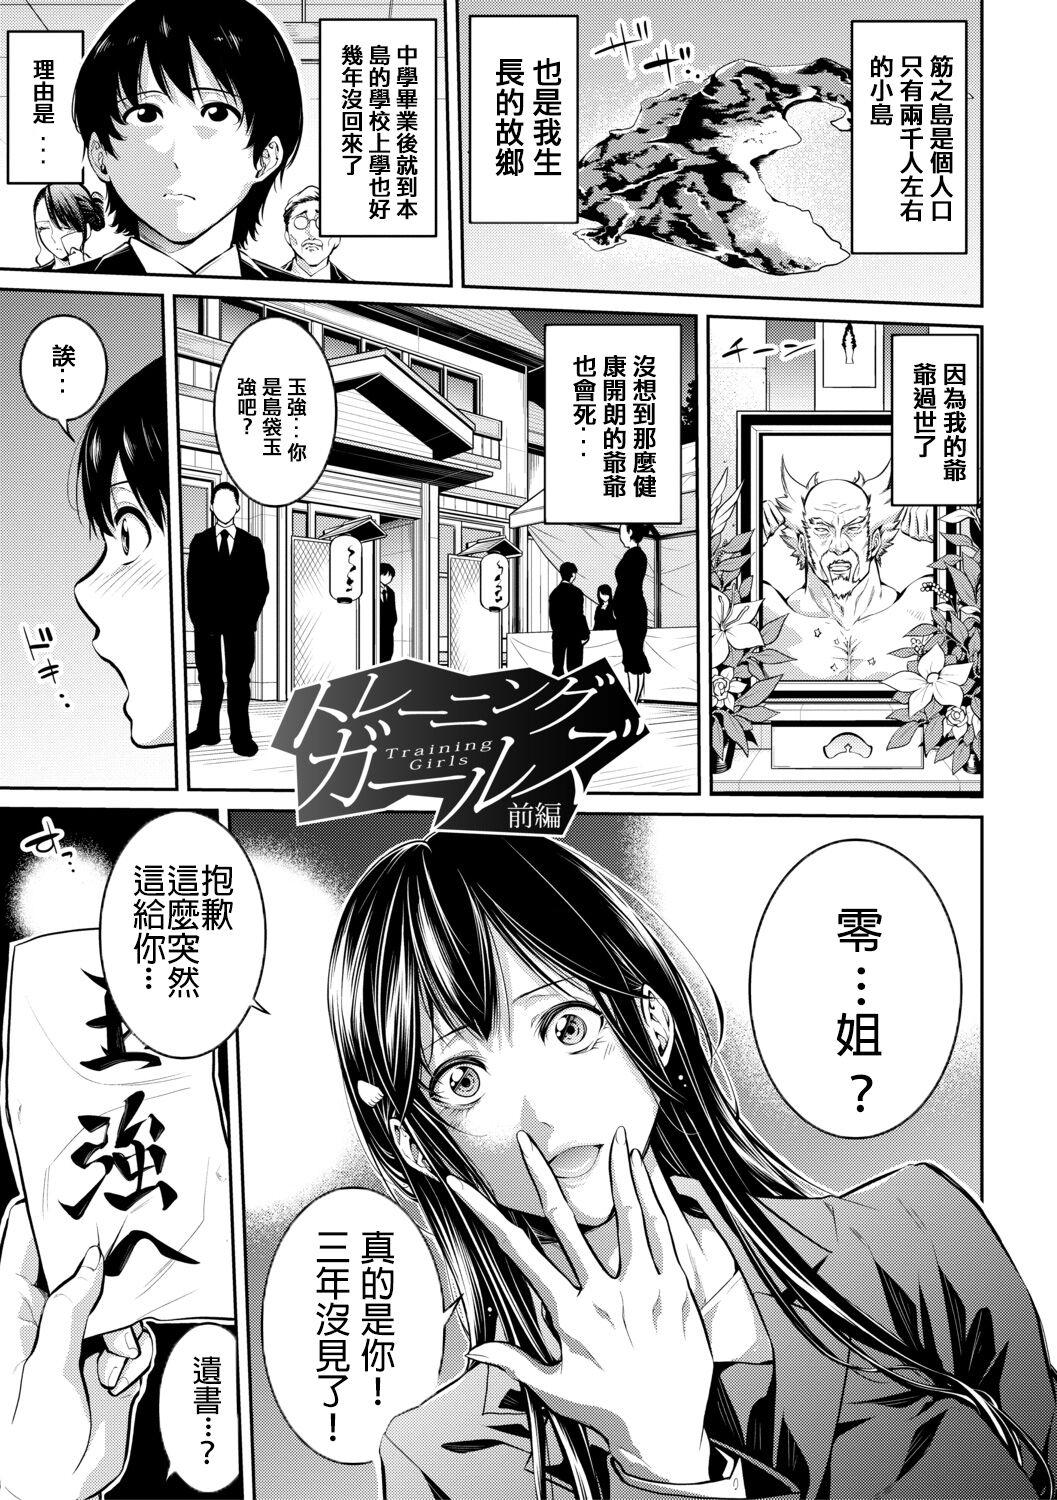 Solo [Brother Pierrot] Onee-san to Ase Mamire Ch. 1-5 [Chinese] [Digital] Women Sucking Dick - Page 3